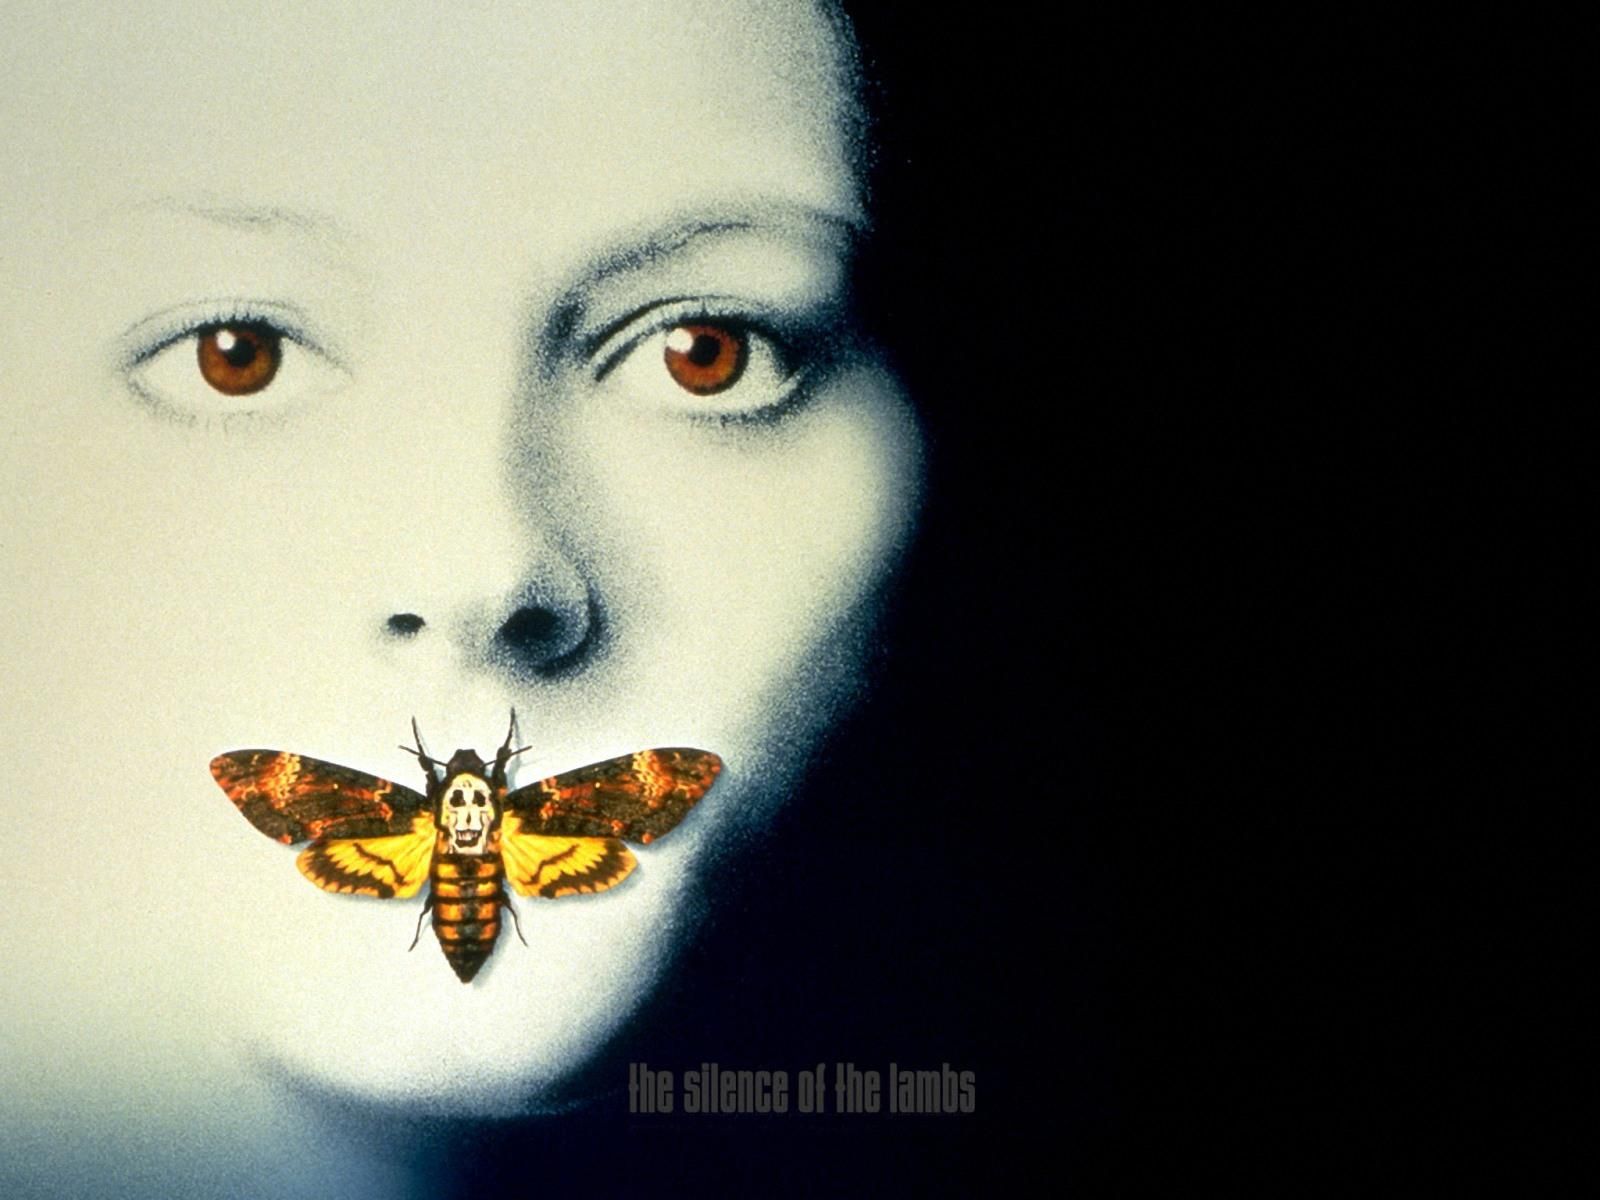 silence of the lambs Wallpapers - Free silence of the lambs ...